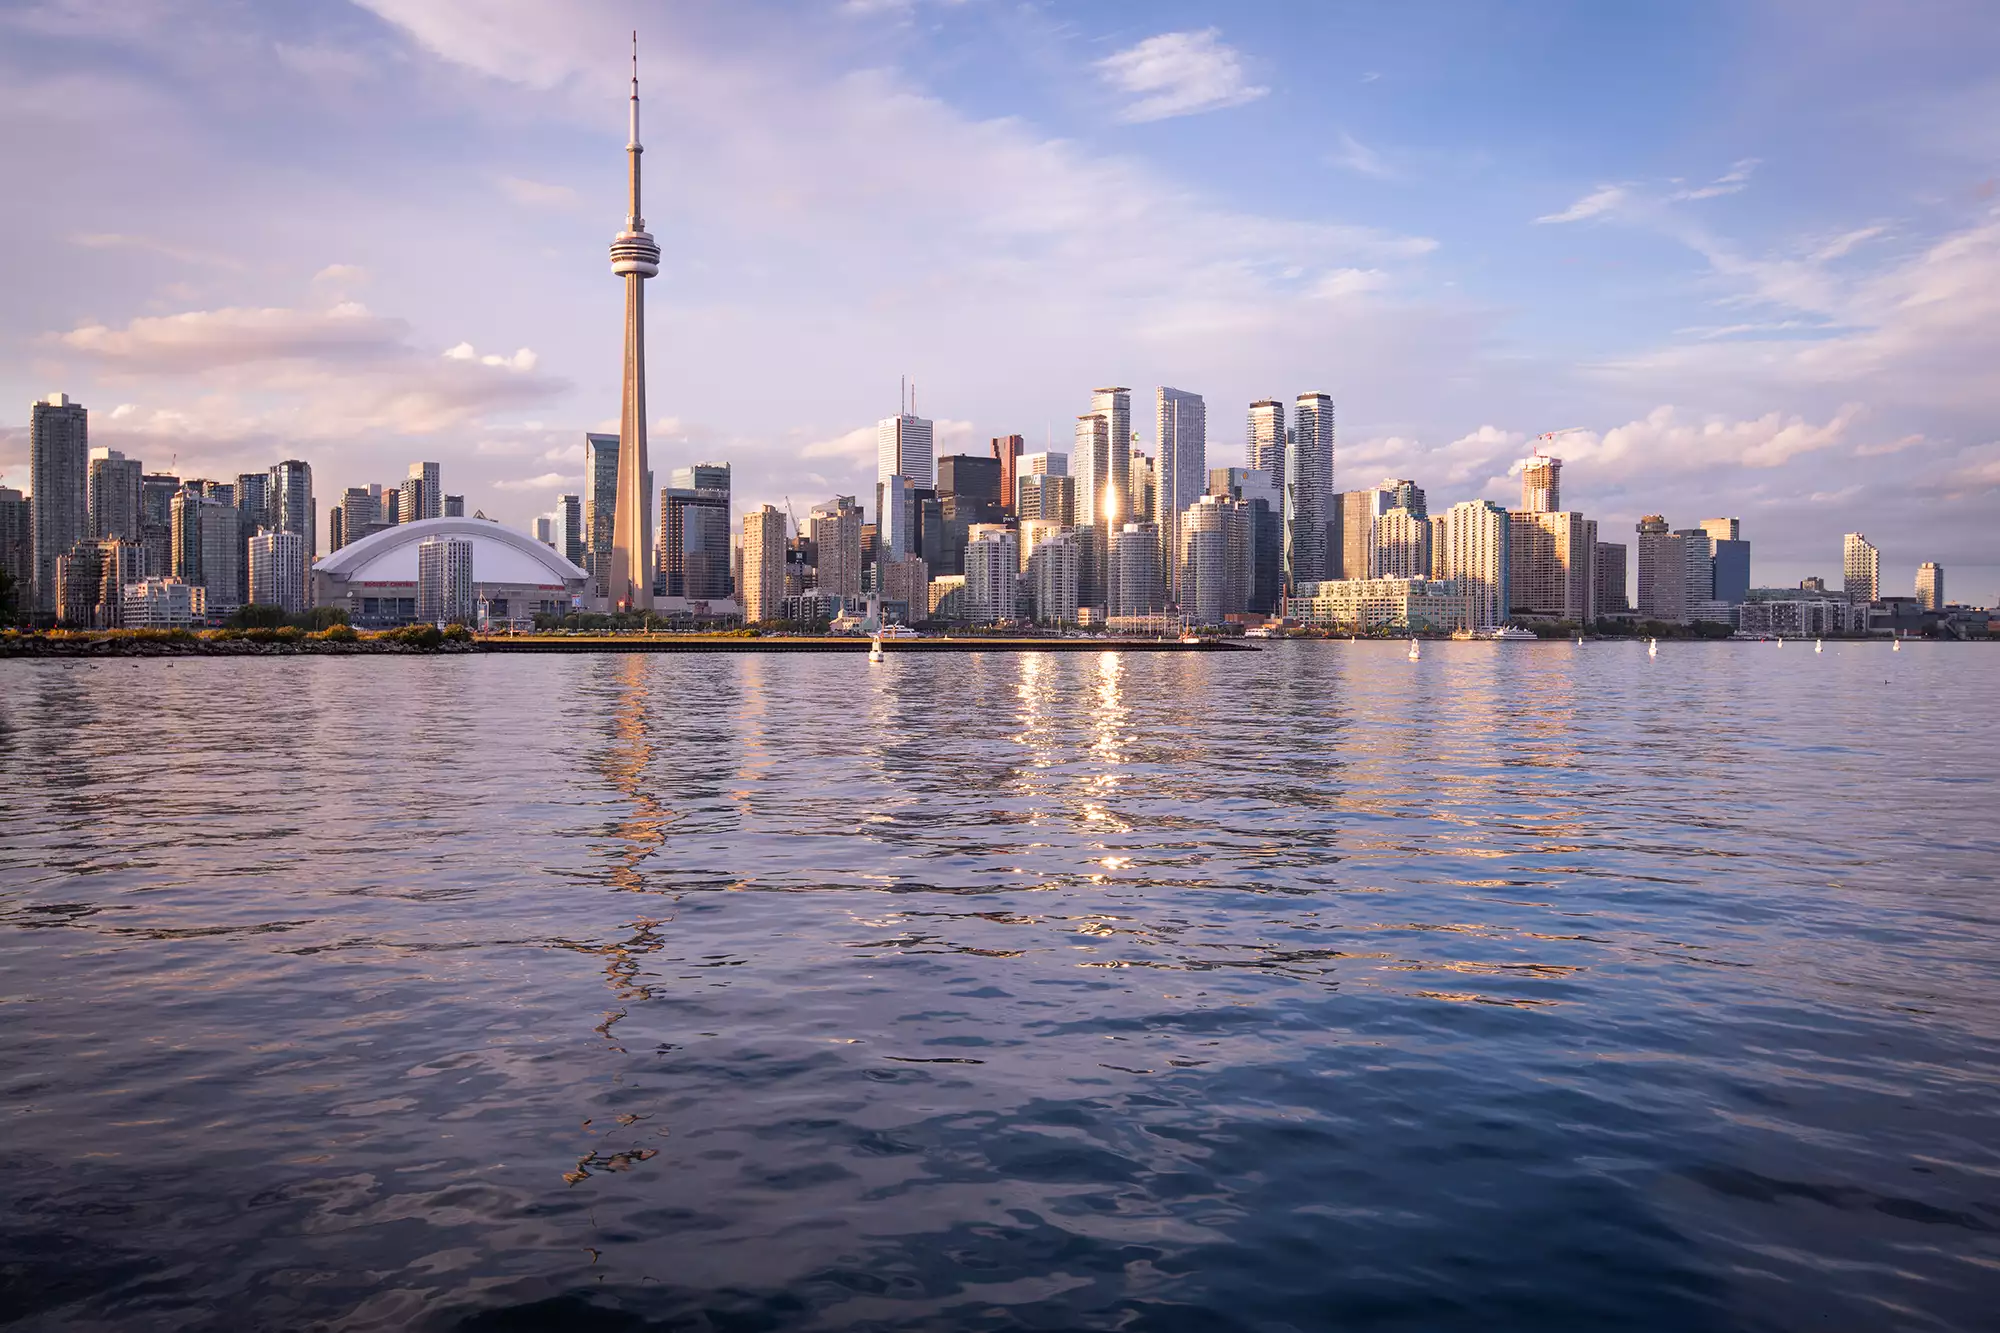 Photoshoot locations in toronto: view from the toronto islands